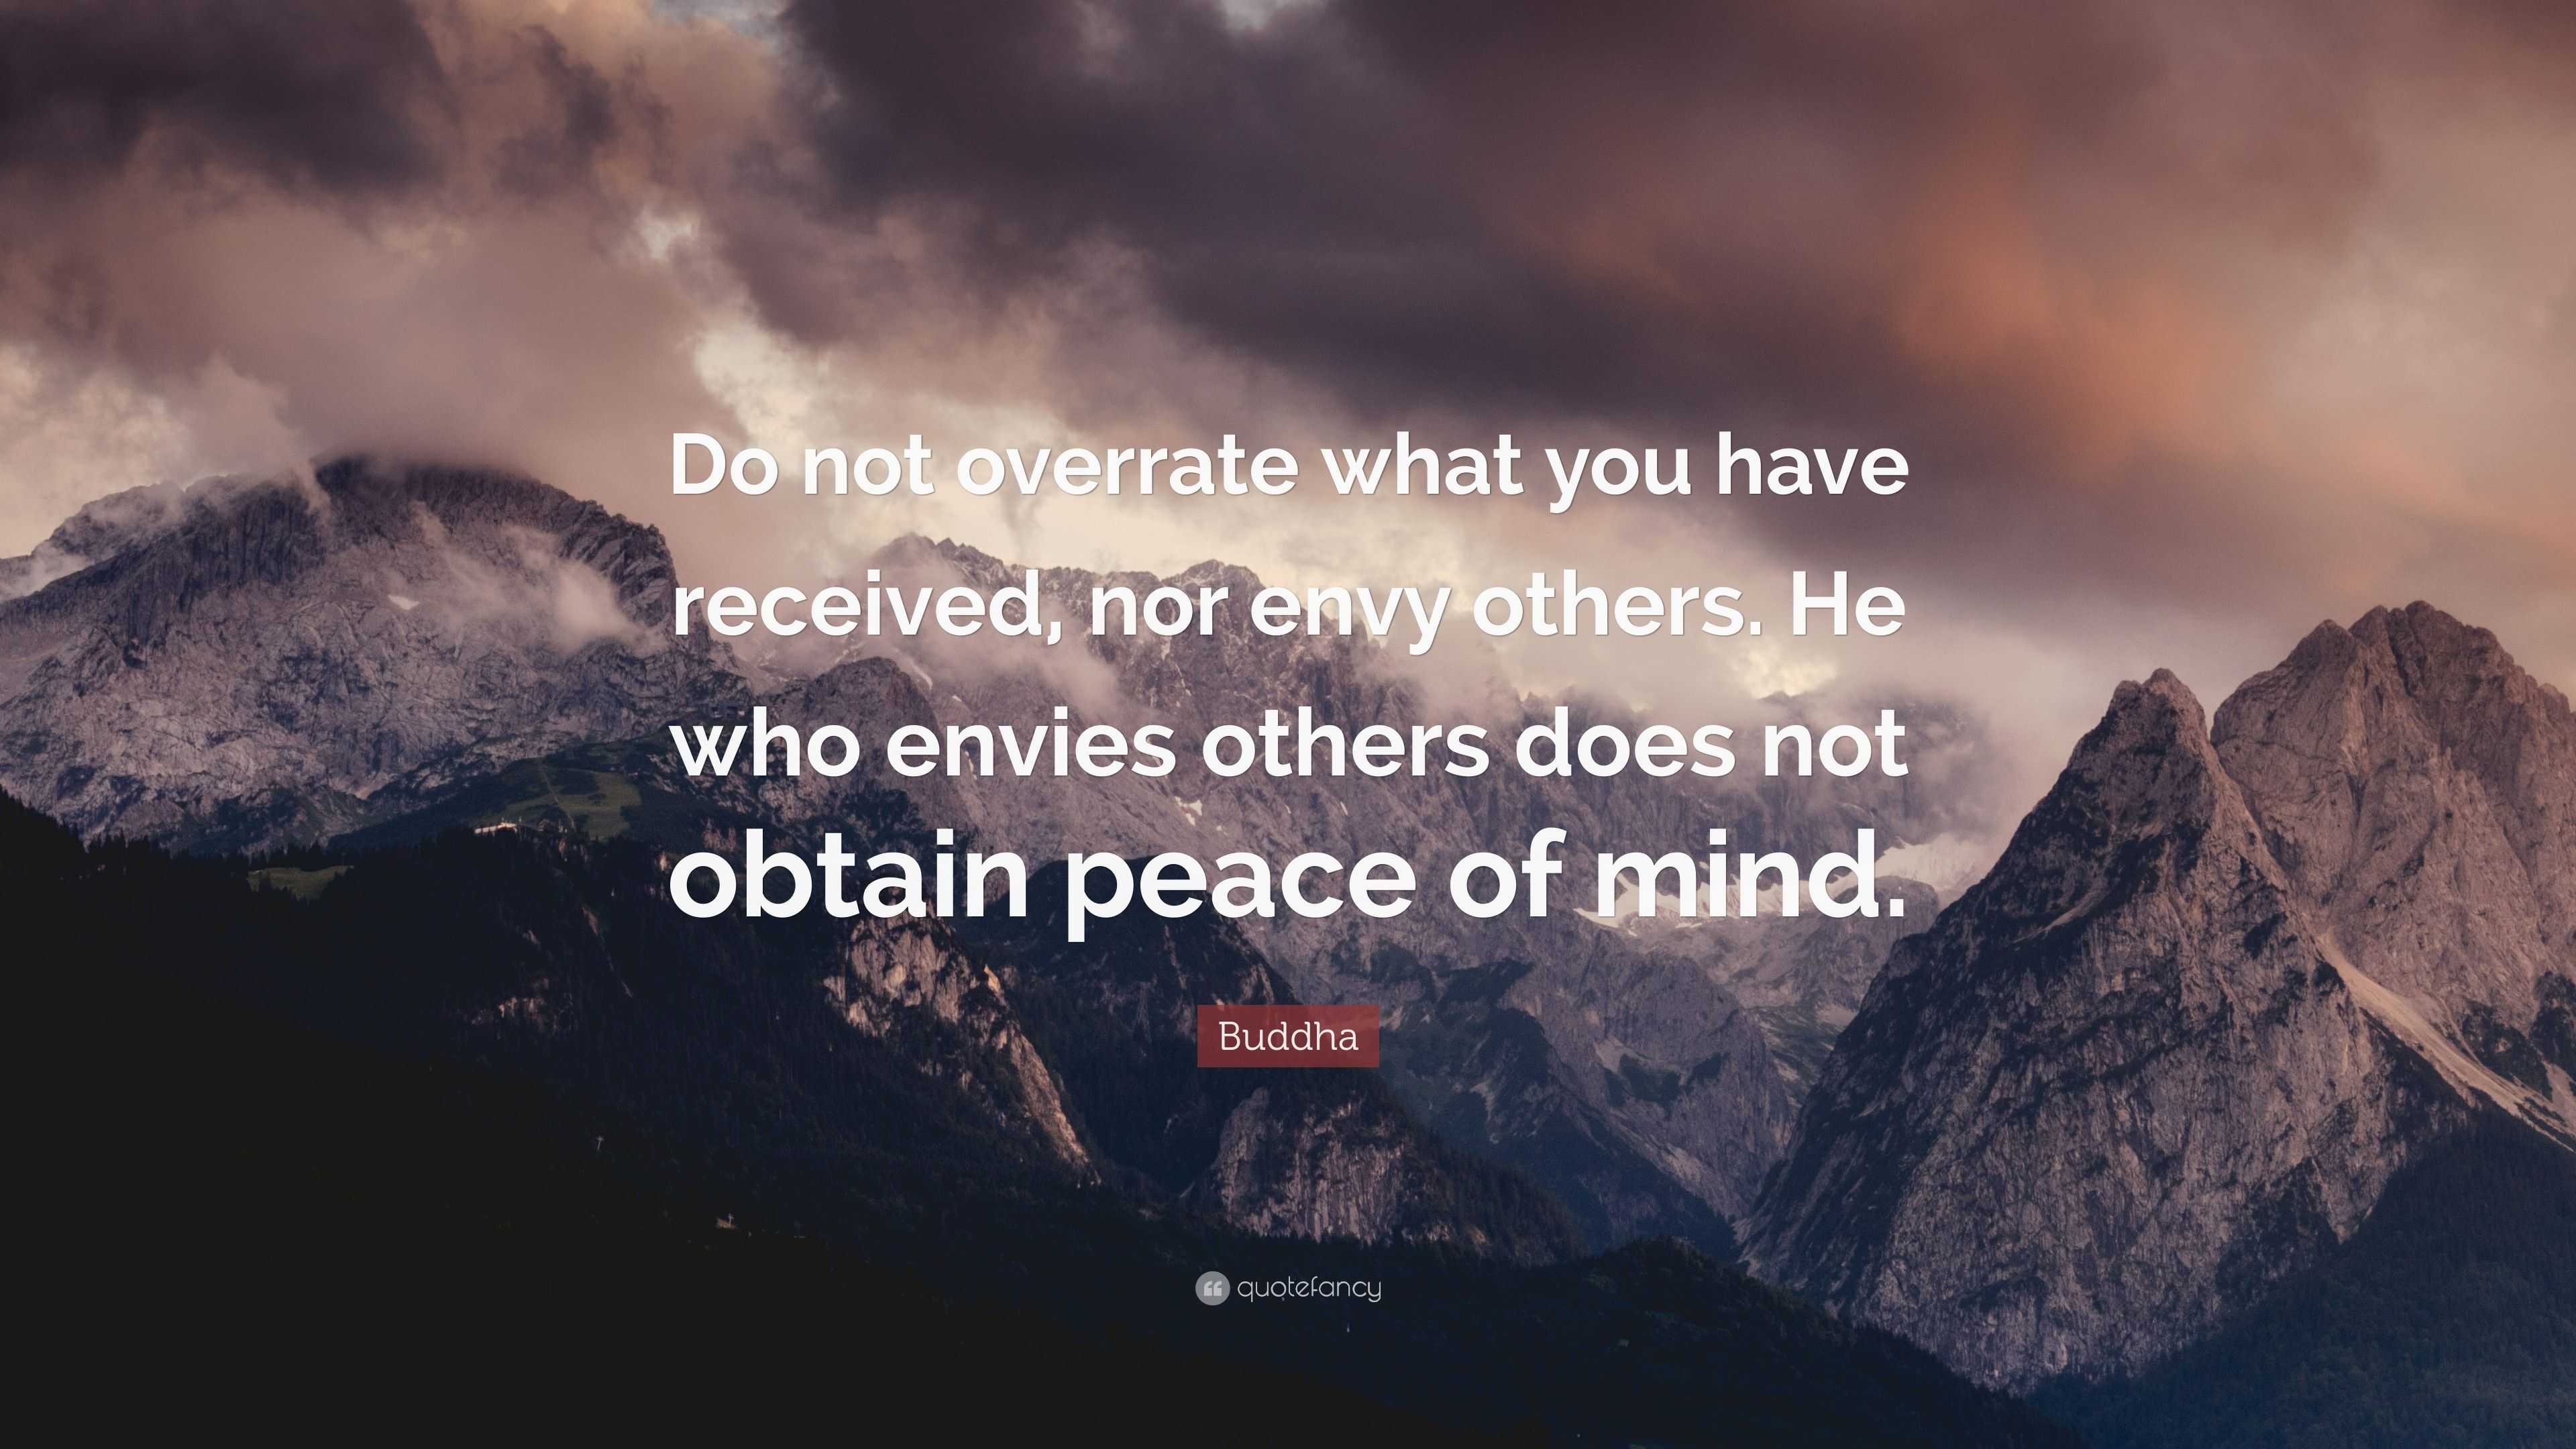 Buddha Quote: “Do not overrate what you have received, nor envy others ...